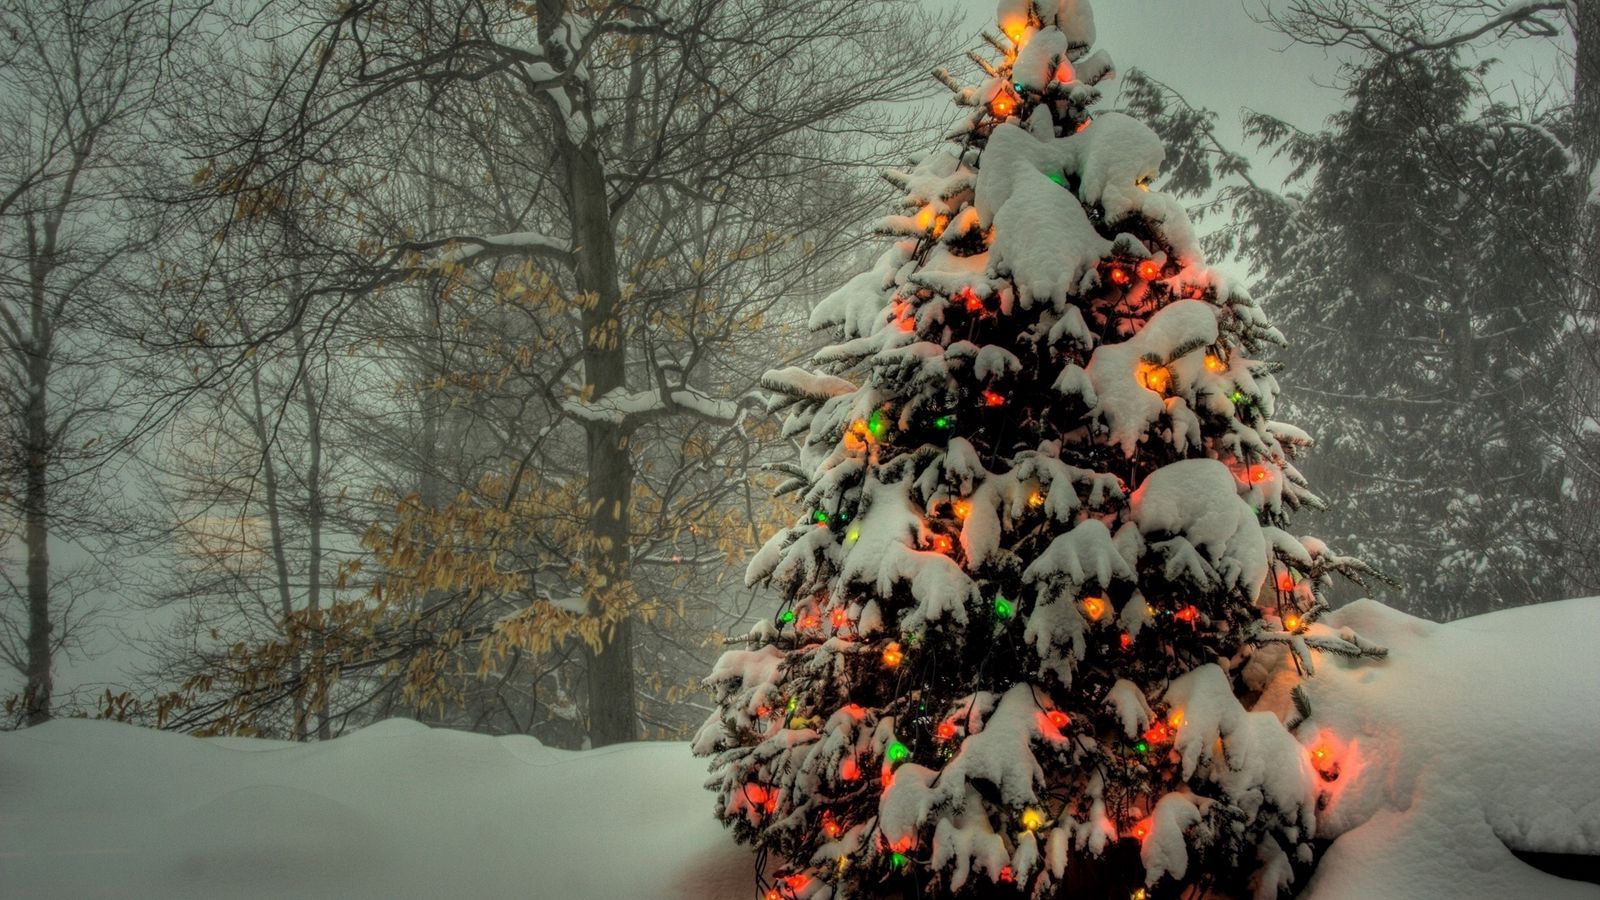 Download wallpaper 1600x900 christmas tree, toys, light, snow widescreen 16:9 HD background